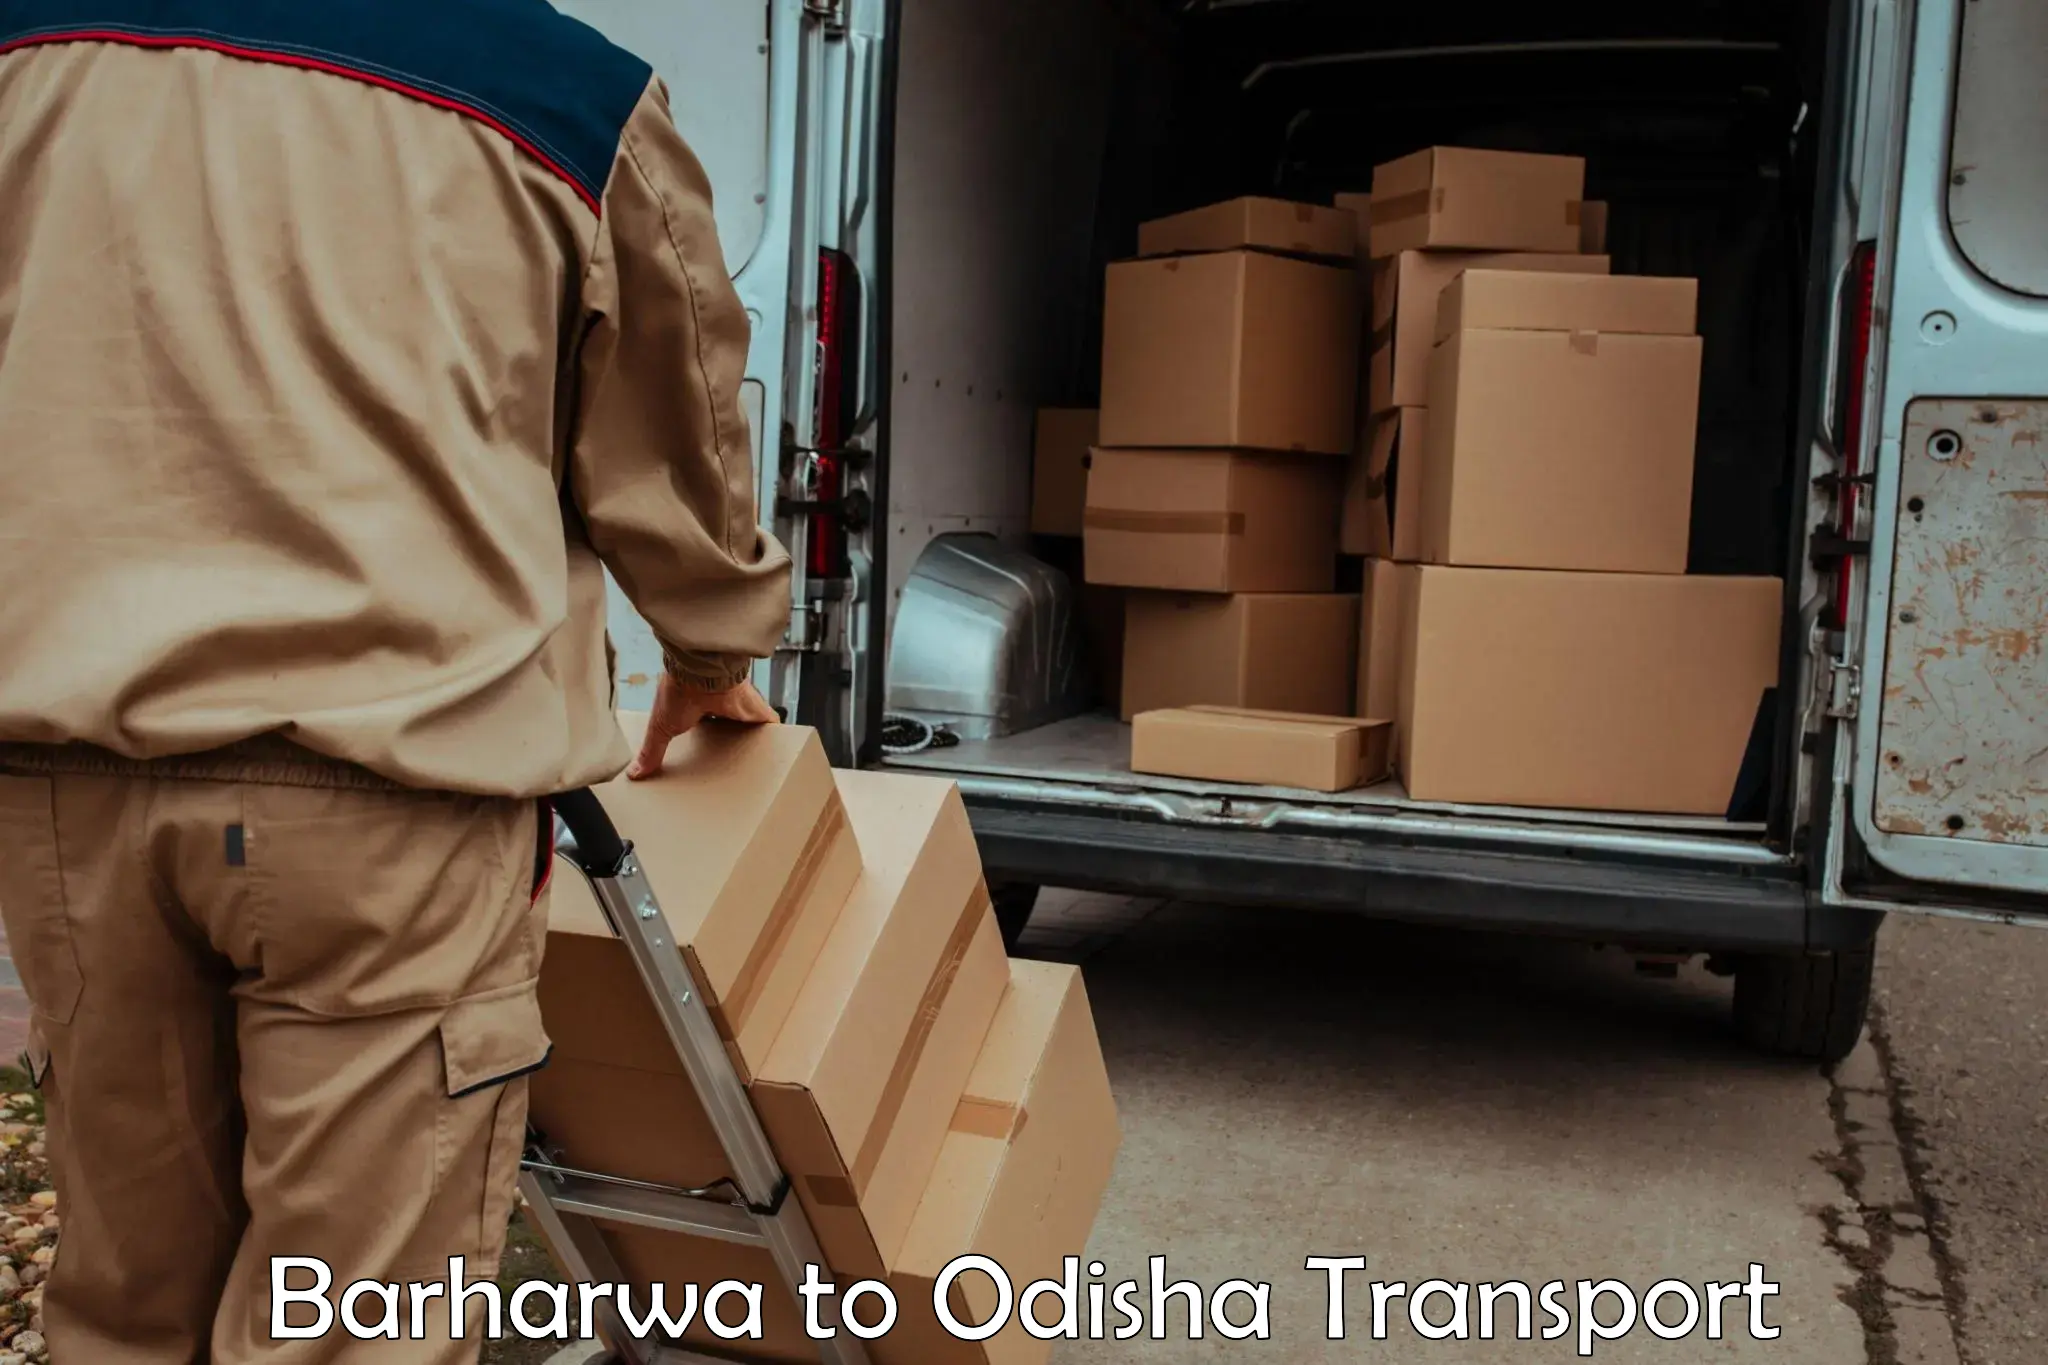 Part load transport service in India Barharwa to Swampatna